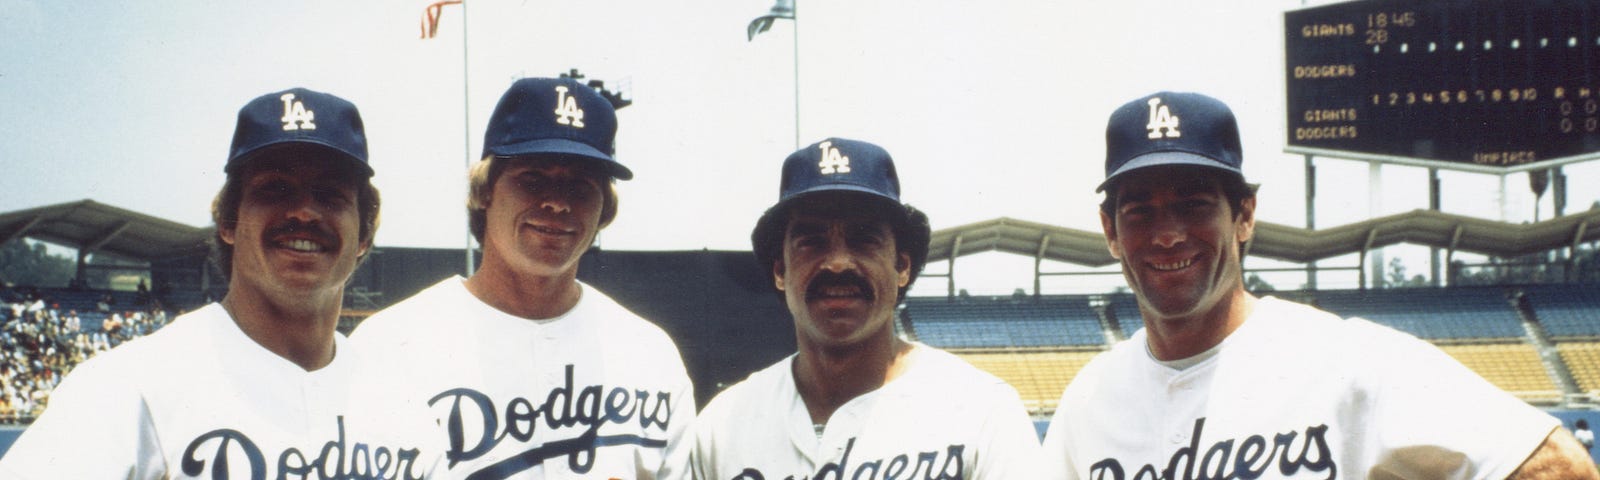 Dodger to celebrate 'Legendary Infield' on its 50th anniversary